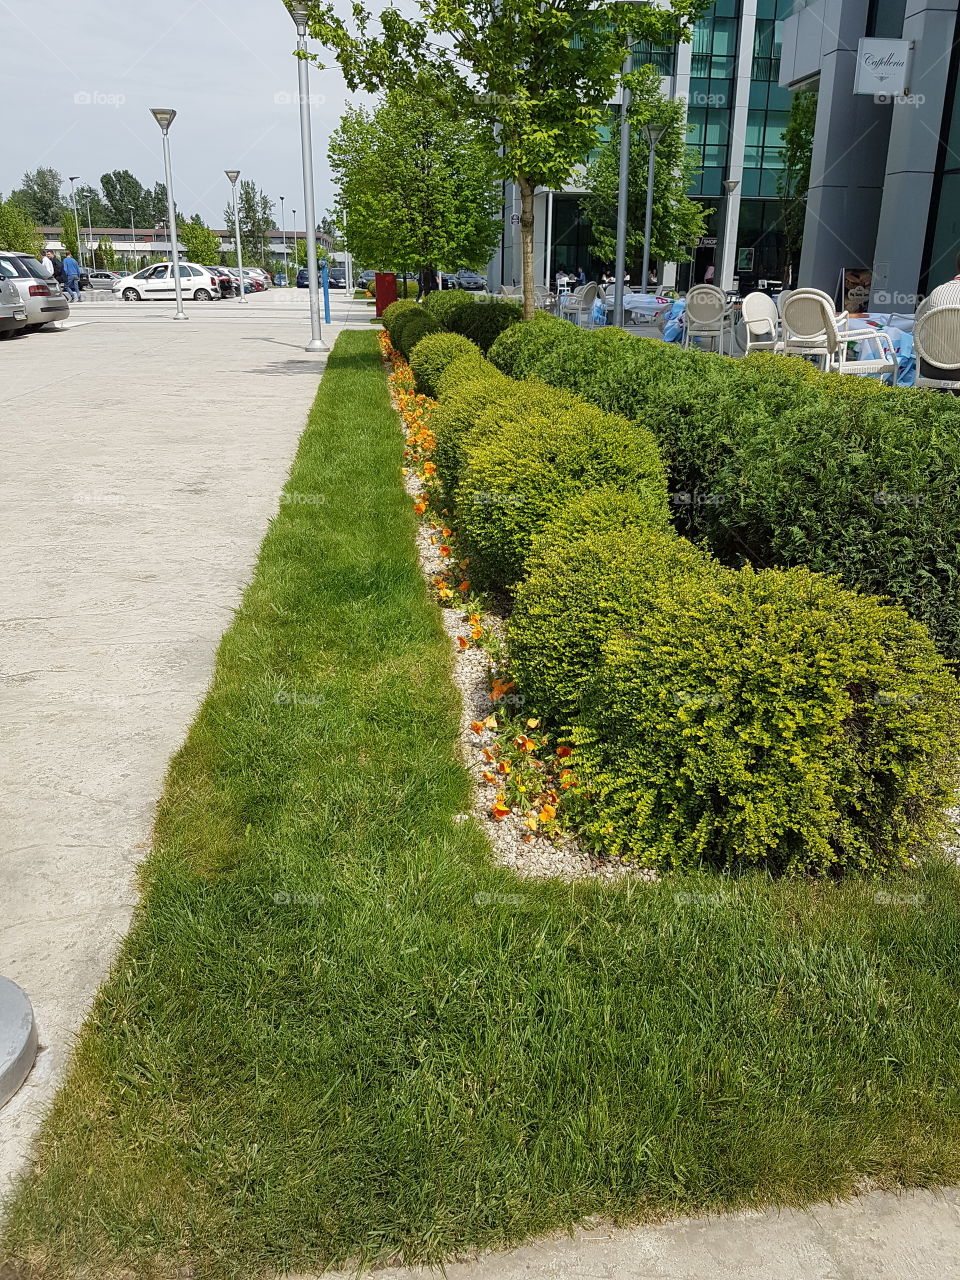 green grass and flowers in the airport city belgrade, serbia